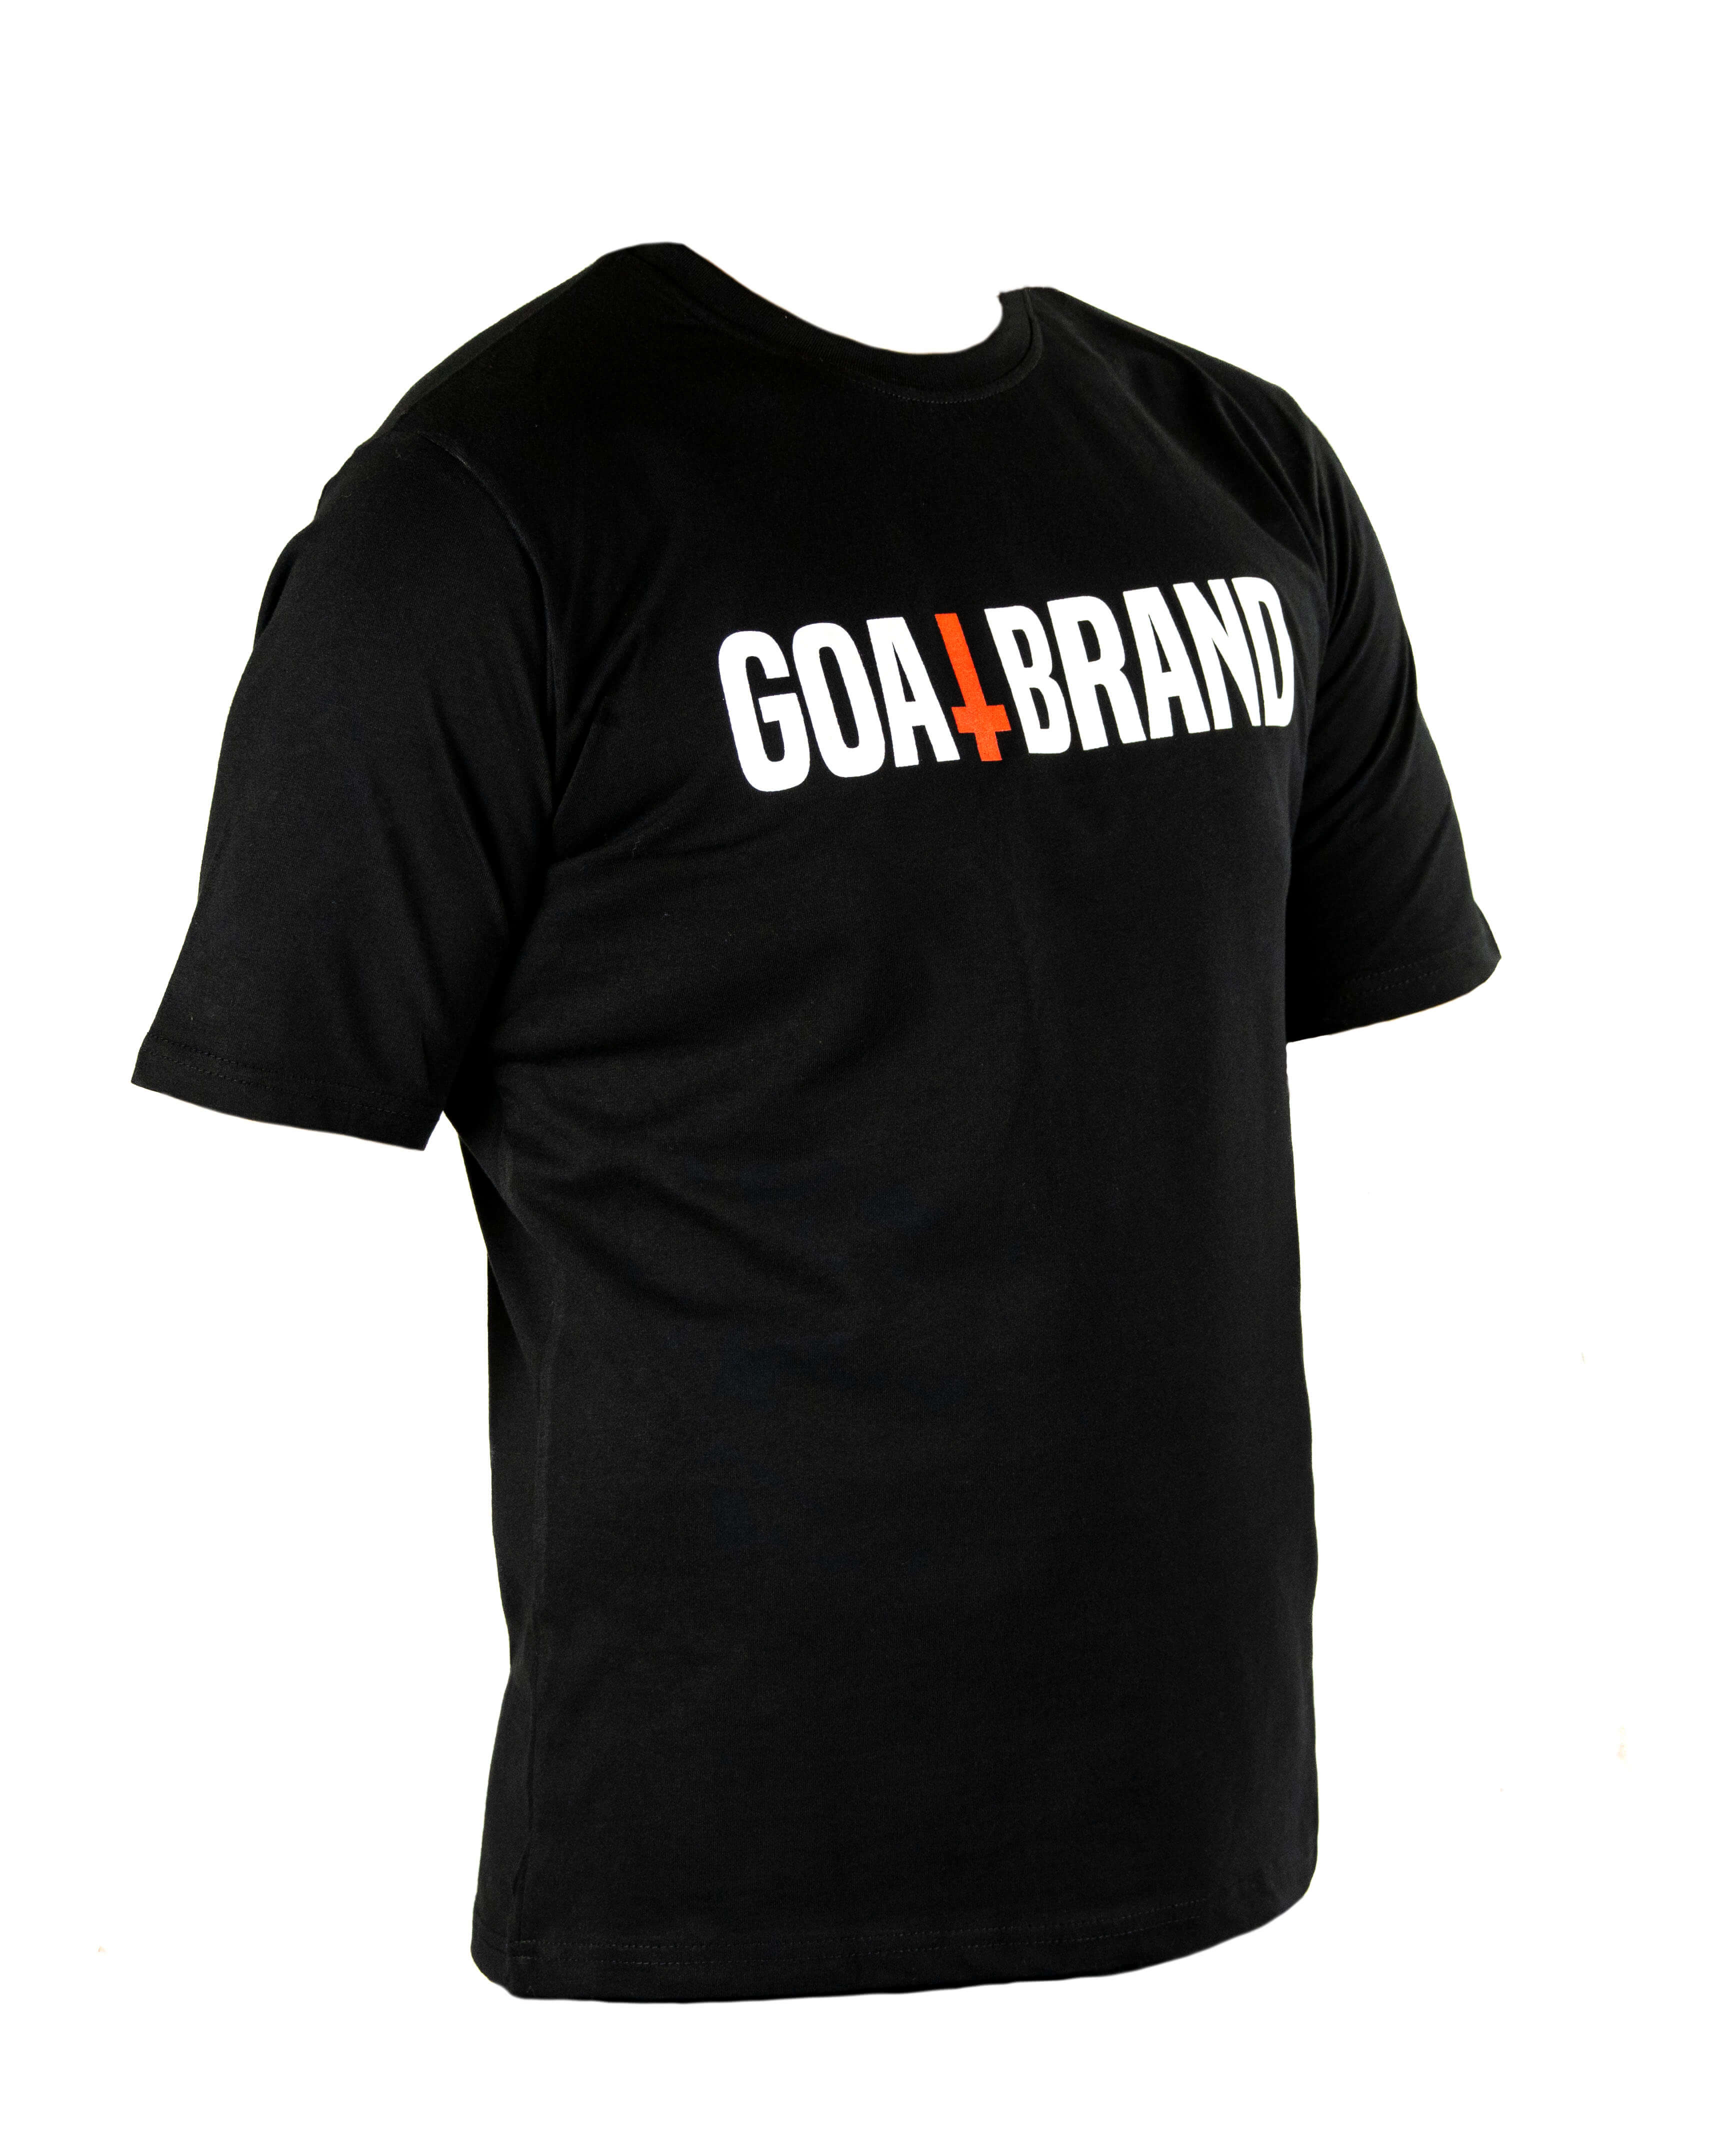 The GOATBRAND Casual Tee